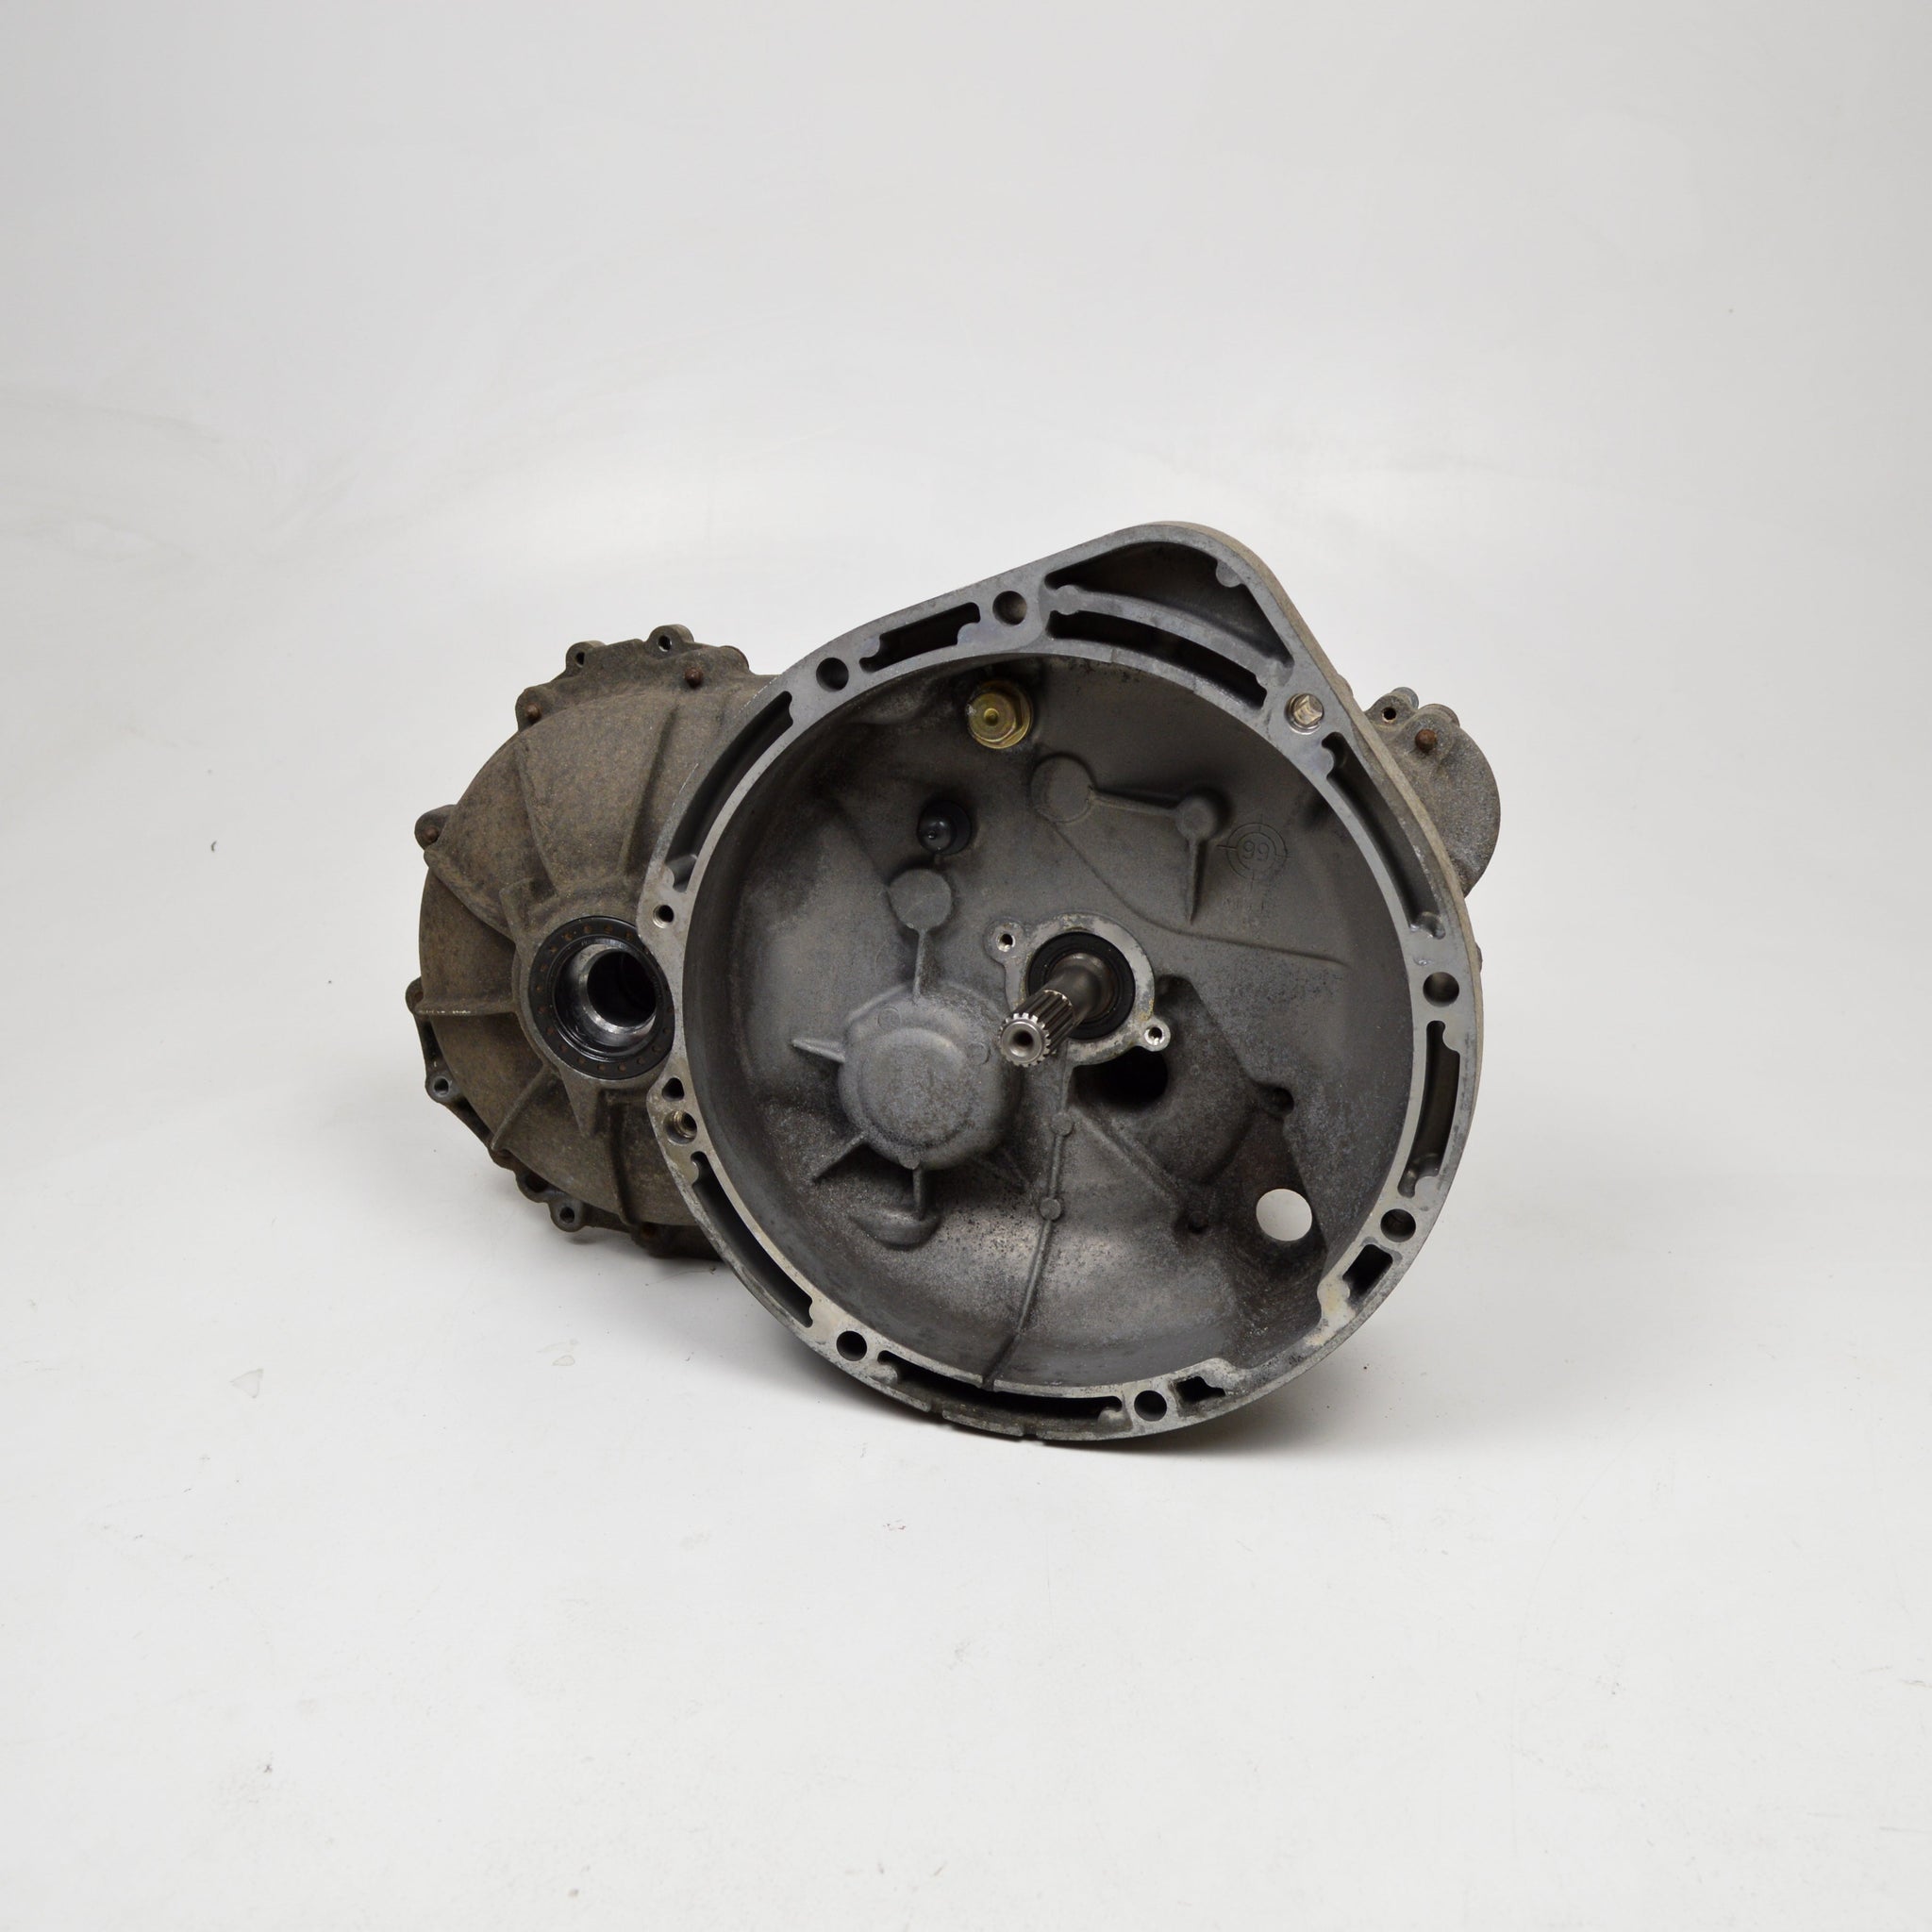 Smart 450 gearbox semi-automatic automatic gearbox 689ccm (used)